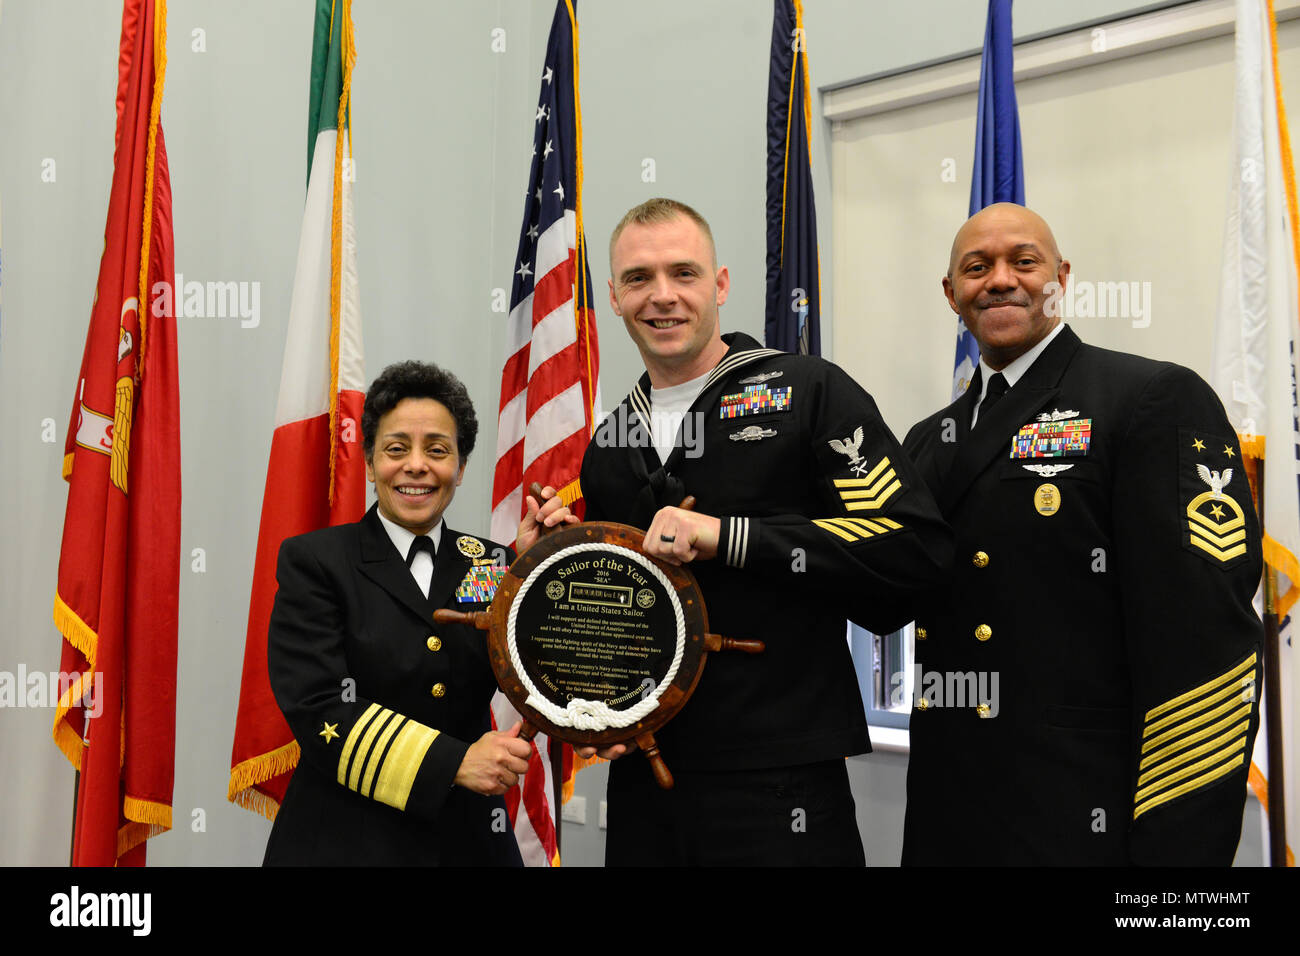 170127-N-SS492-648 NAVAL SUPPORT ACTIVITY NAPLES, Italy (Jan. 27, 2017) From left to right: Commander, U.S. Naval Forces Europe-Africa, Adm. Michelle Howard; U.S. Naval Forces Europe-Africa Sea Sailor of the Year, Intelligence Specialist 1st Class Kevin Pulley; and U.S. Naval Forces Europe-Africa Fleet Master Chief Raymond D. Kemp Sr. pose for a photo as Howard presents Pulley with a plaque at the Commander, U.S. Naval Forces Europe-Africa Sailor of the Year ceremony Jan. 27, 2017.  U.S. Naval Forces Europe-Africa, headquartered in Naples, Italy, oversees joint and naval operations, often in c Stock Photo